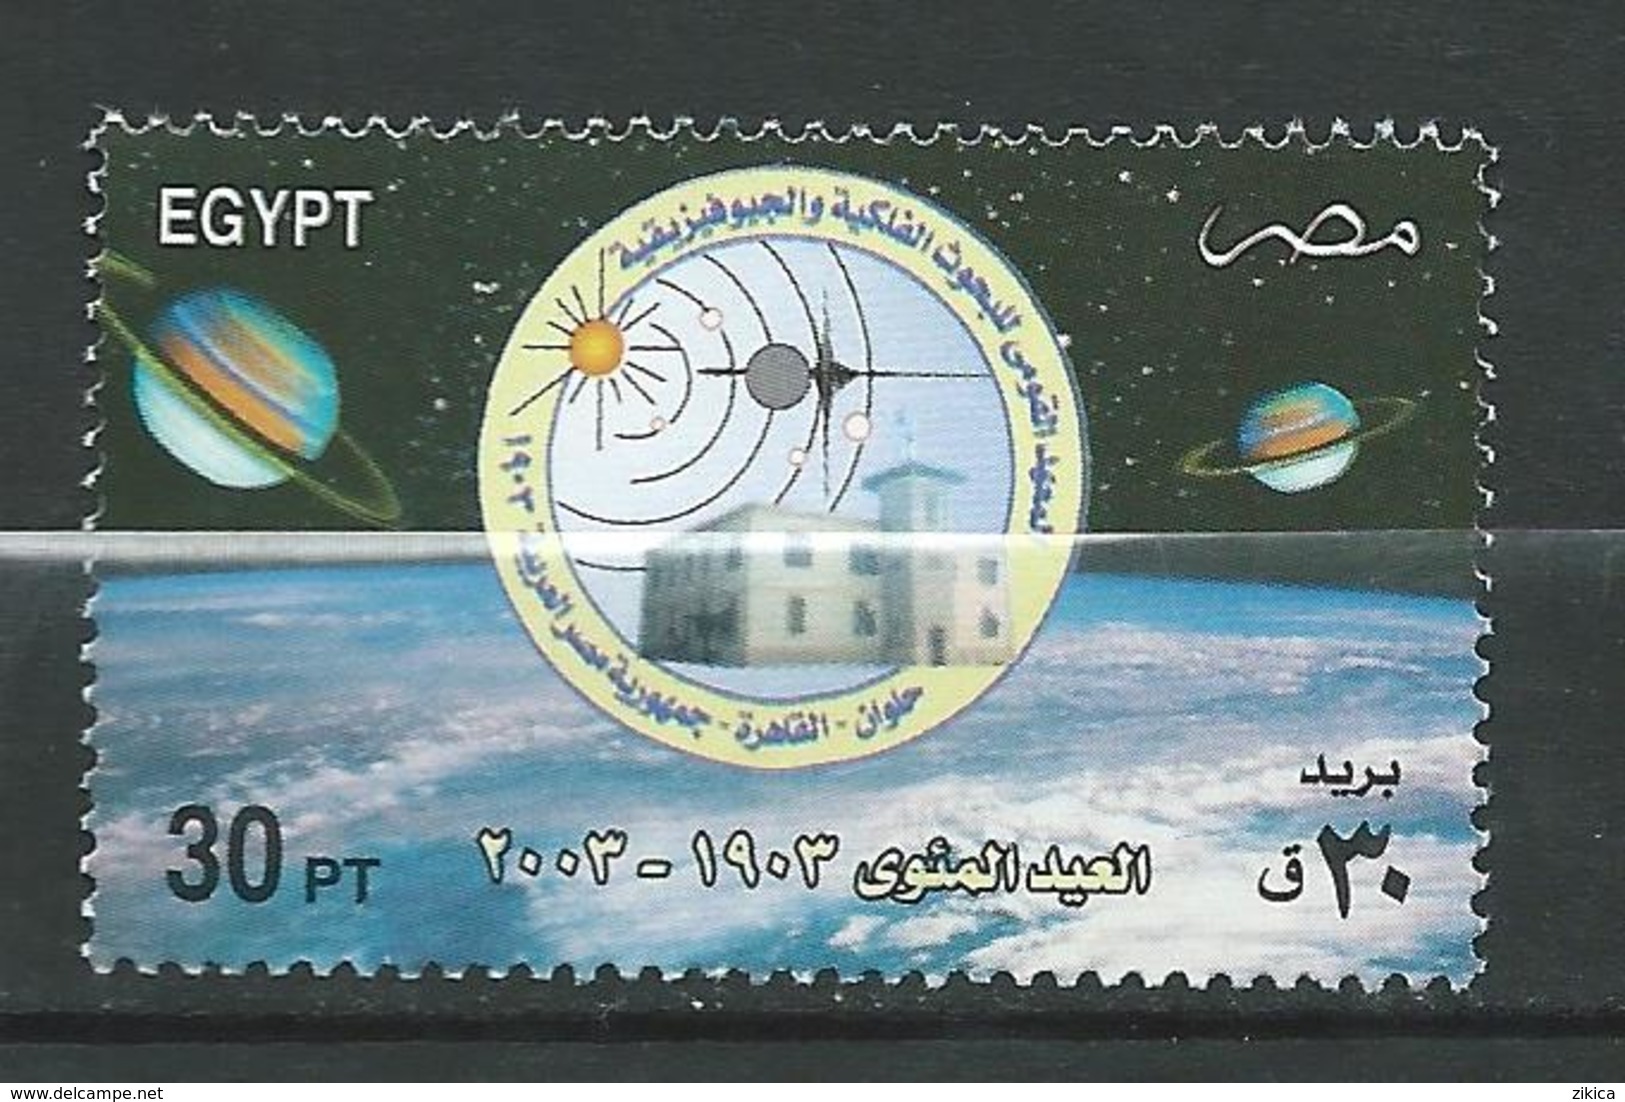 Egypt 2003 The 100th Anniversary Of National Institute For Astrological And Geophysical Research.Space.Astronomy. MNH - Ungebraucht